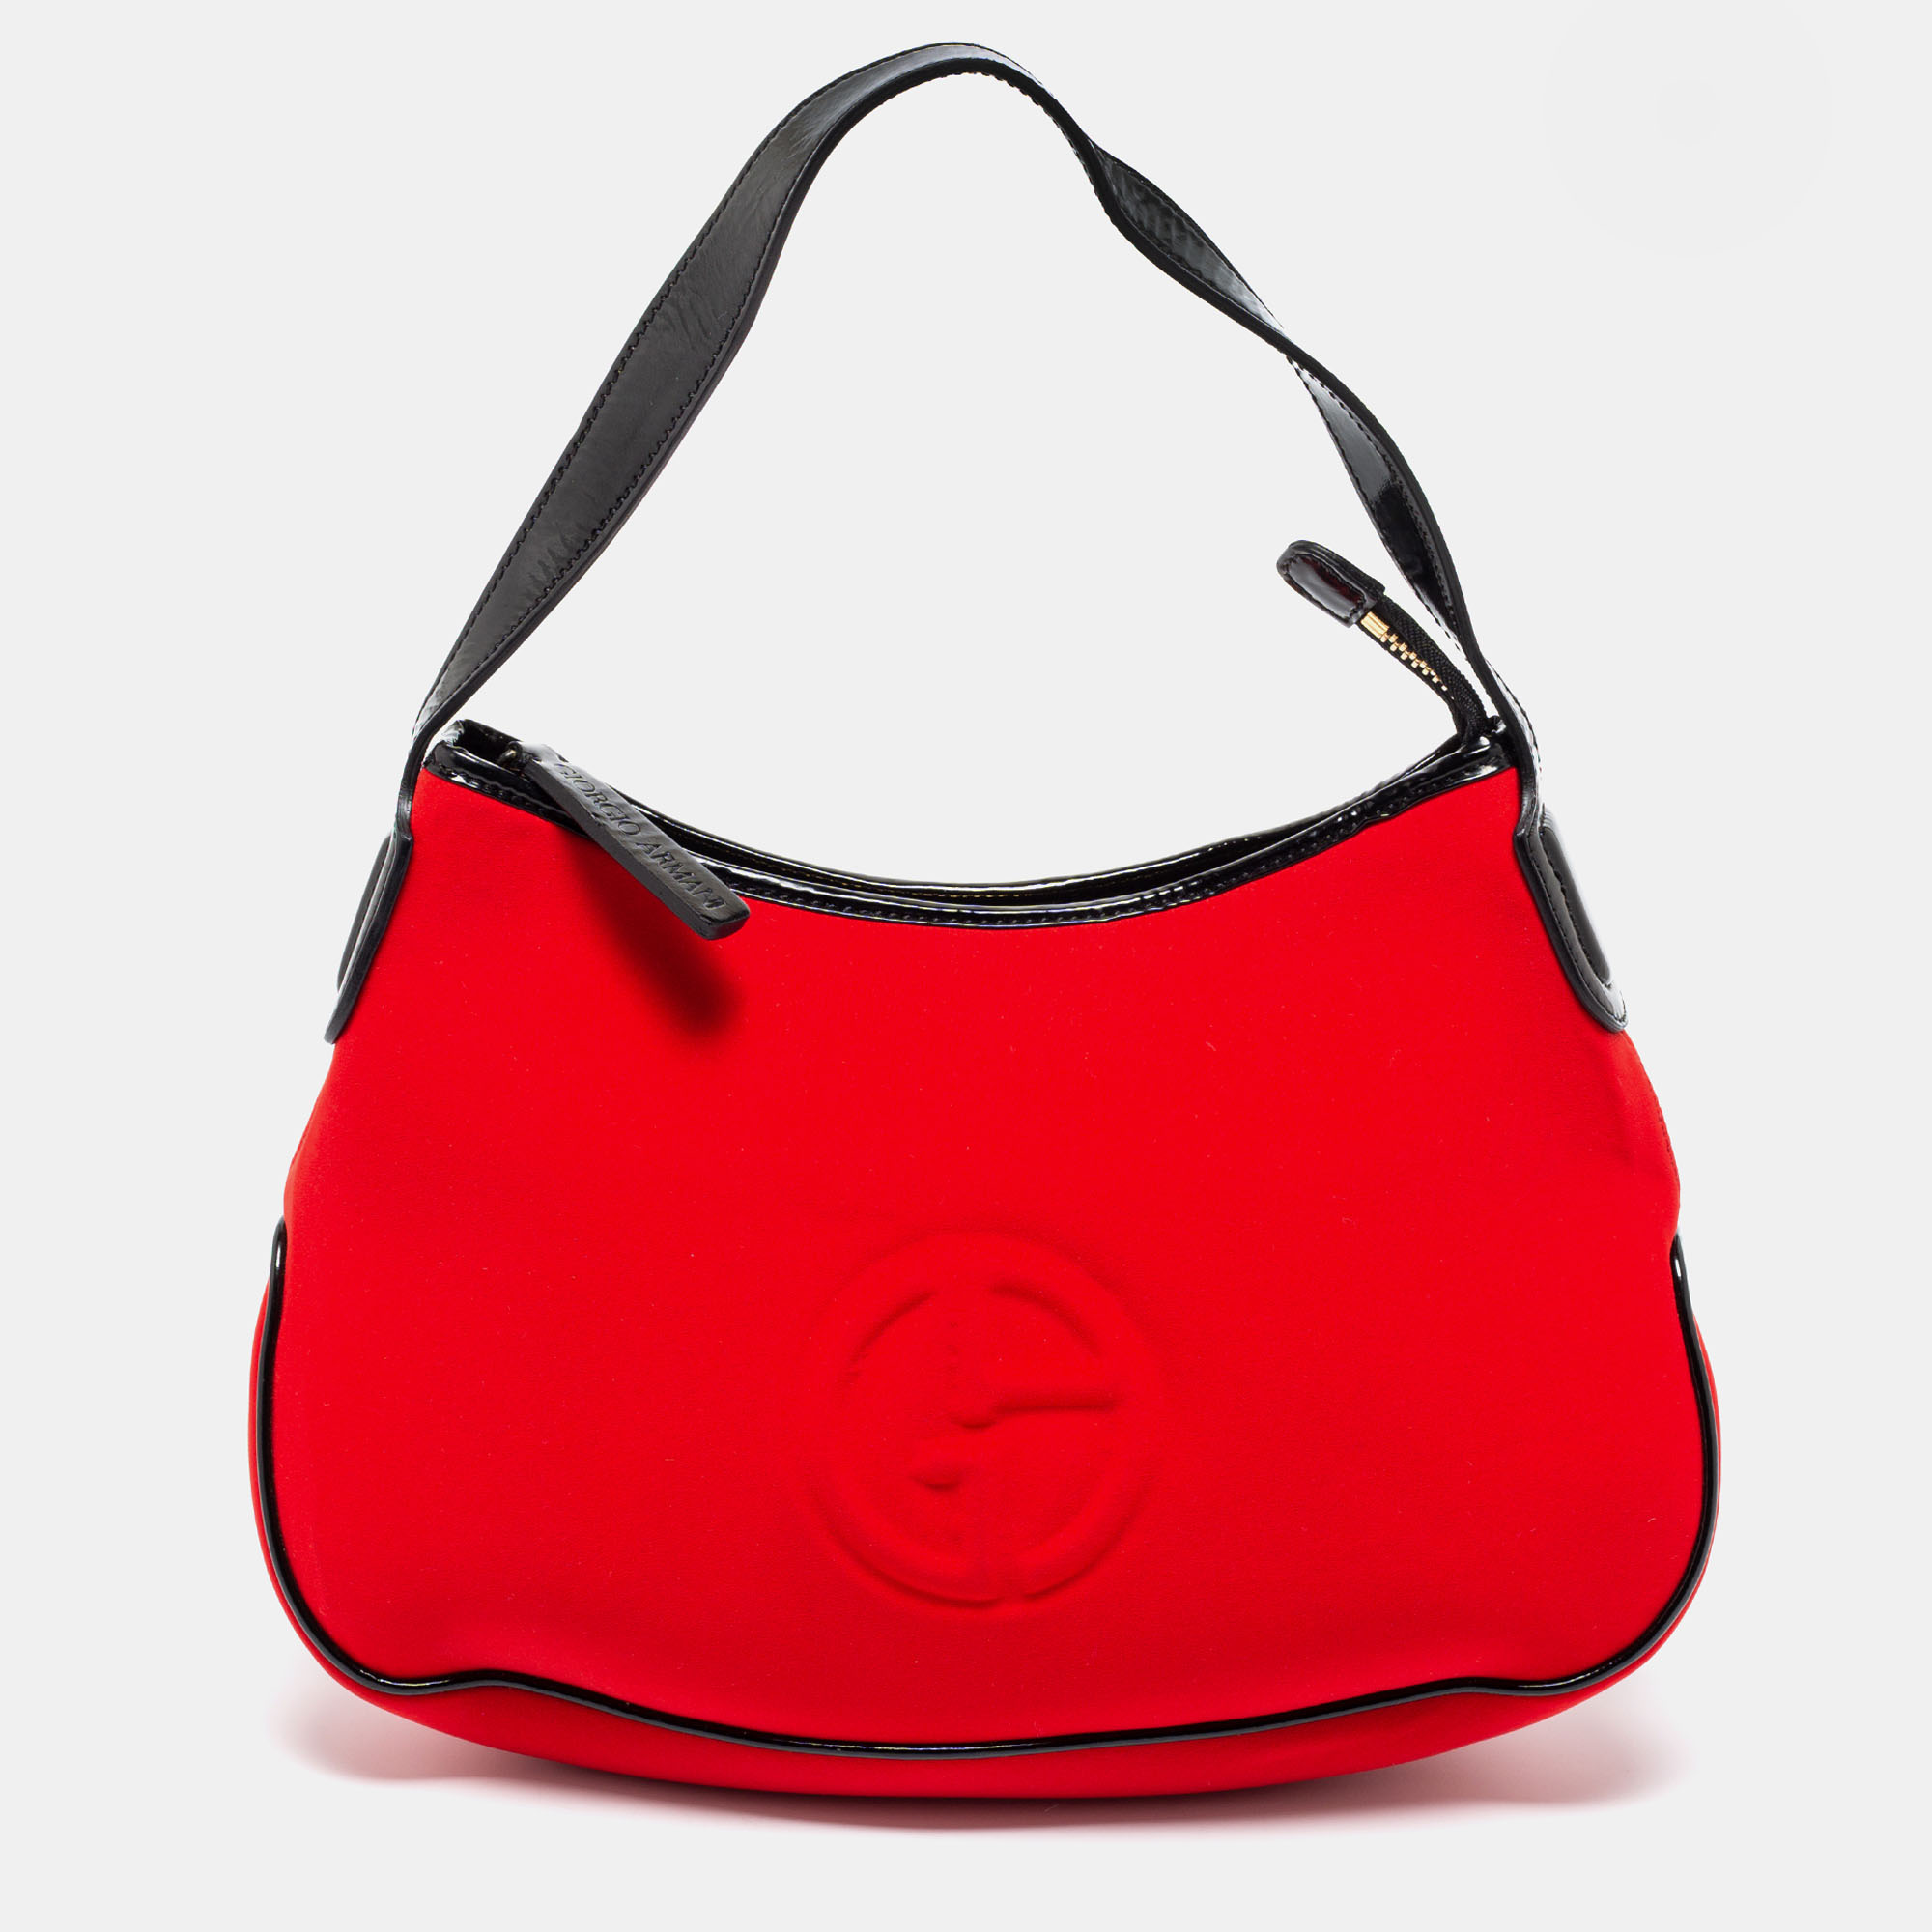 The hobo by Giorgio Armani is an everyday friendly handbag. It is crafted from red neoprene and added with black patent leather trims. This hobo features a top zip closure a lined interior and a single handle.